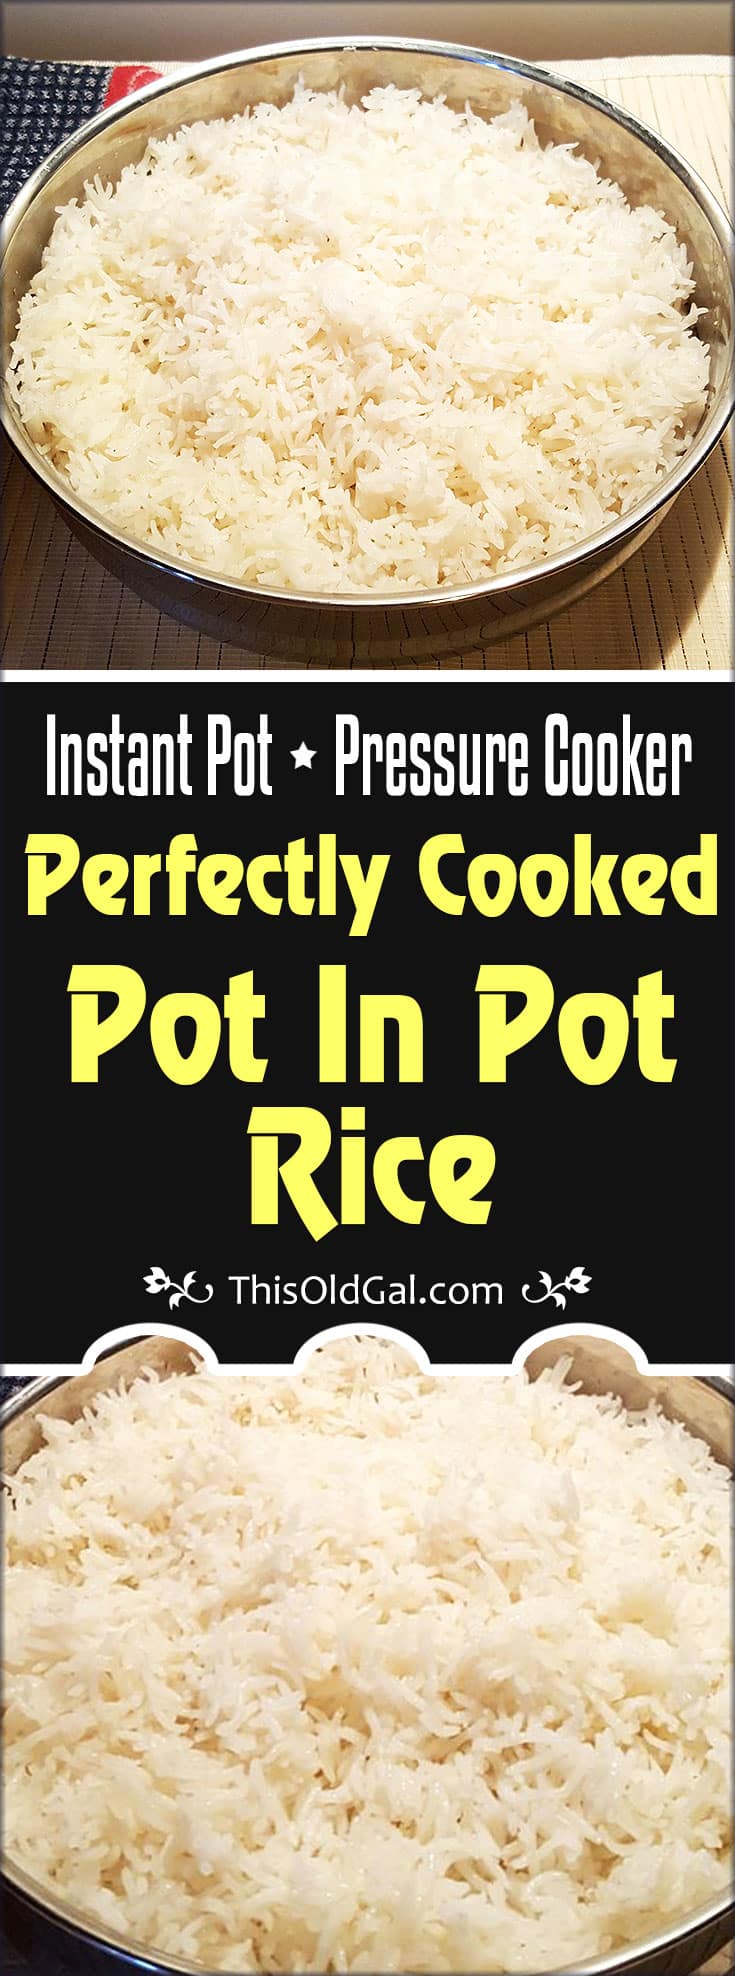 Instant Pot Pressure Cooker Perfectly Cooked Pot In Pot Rice